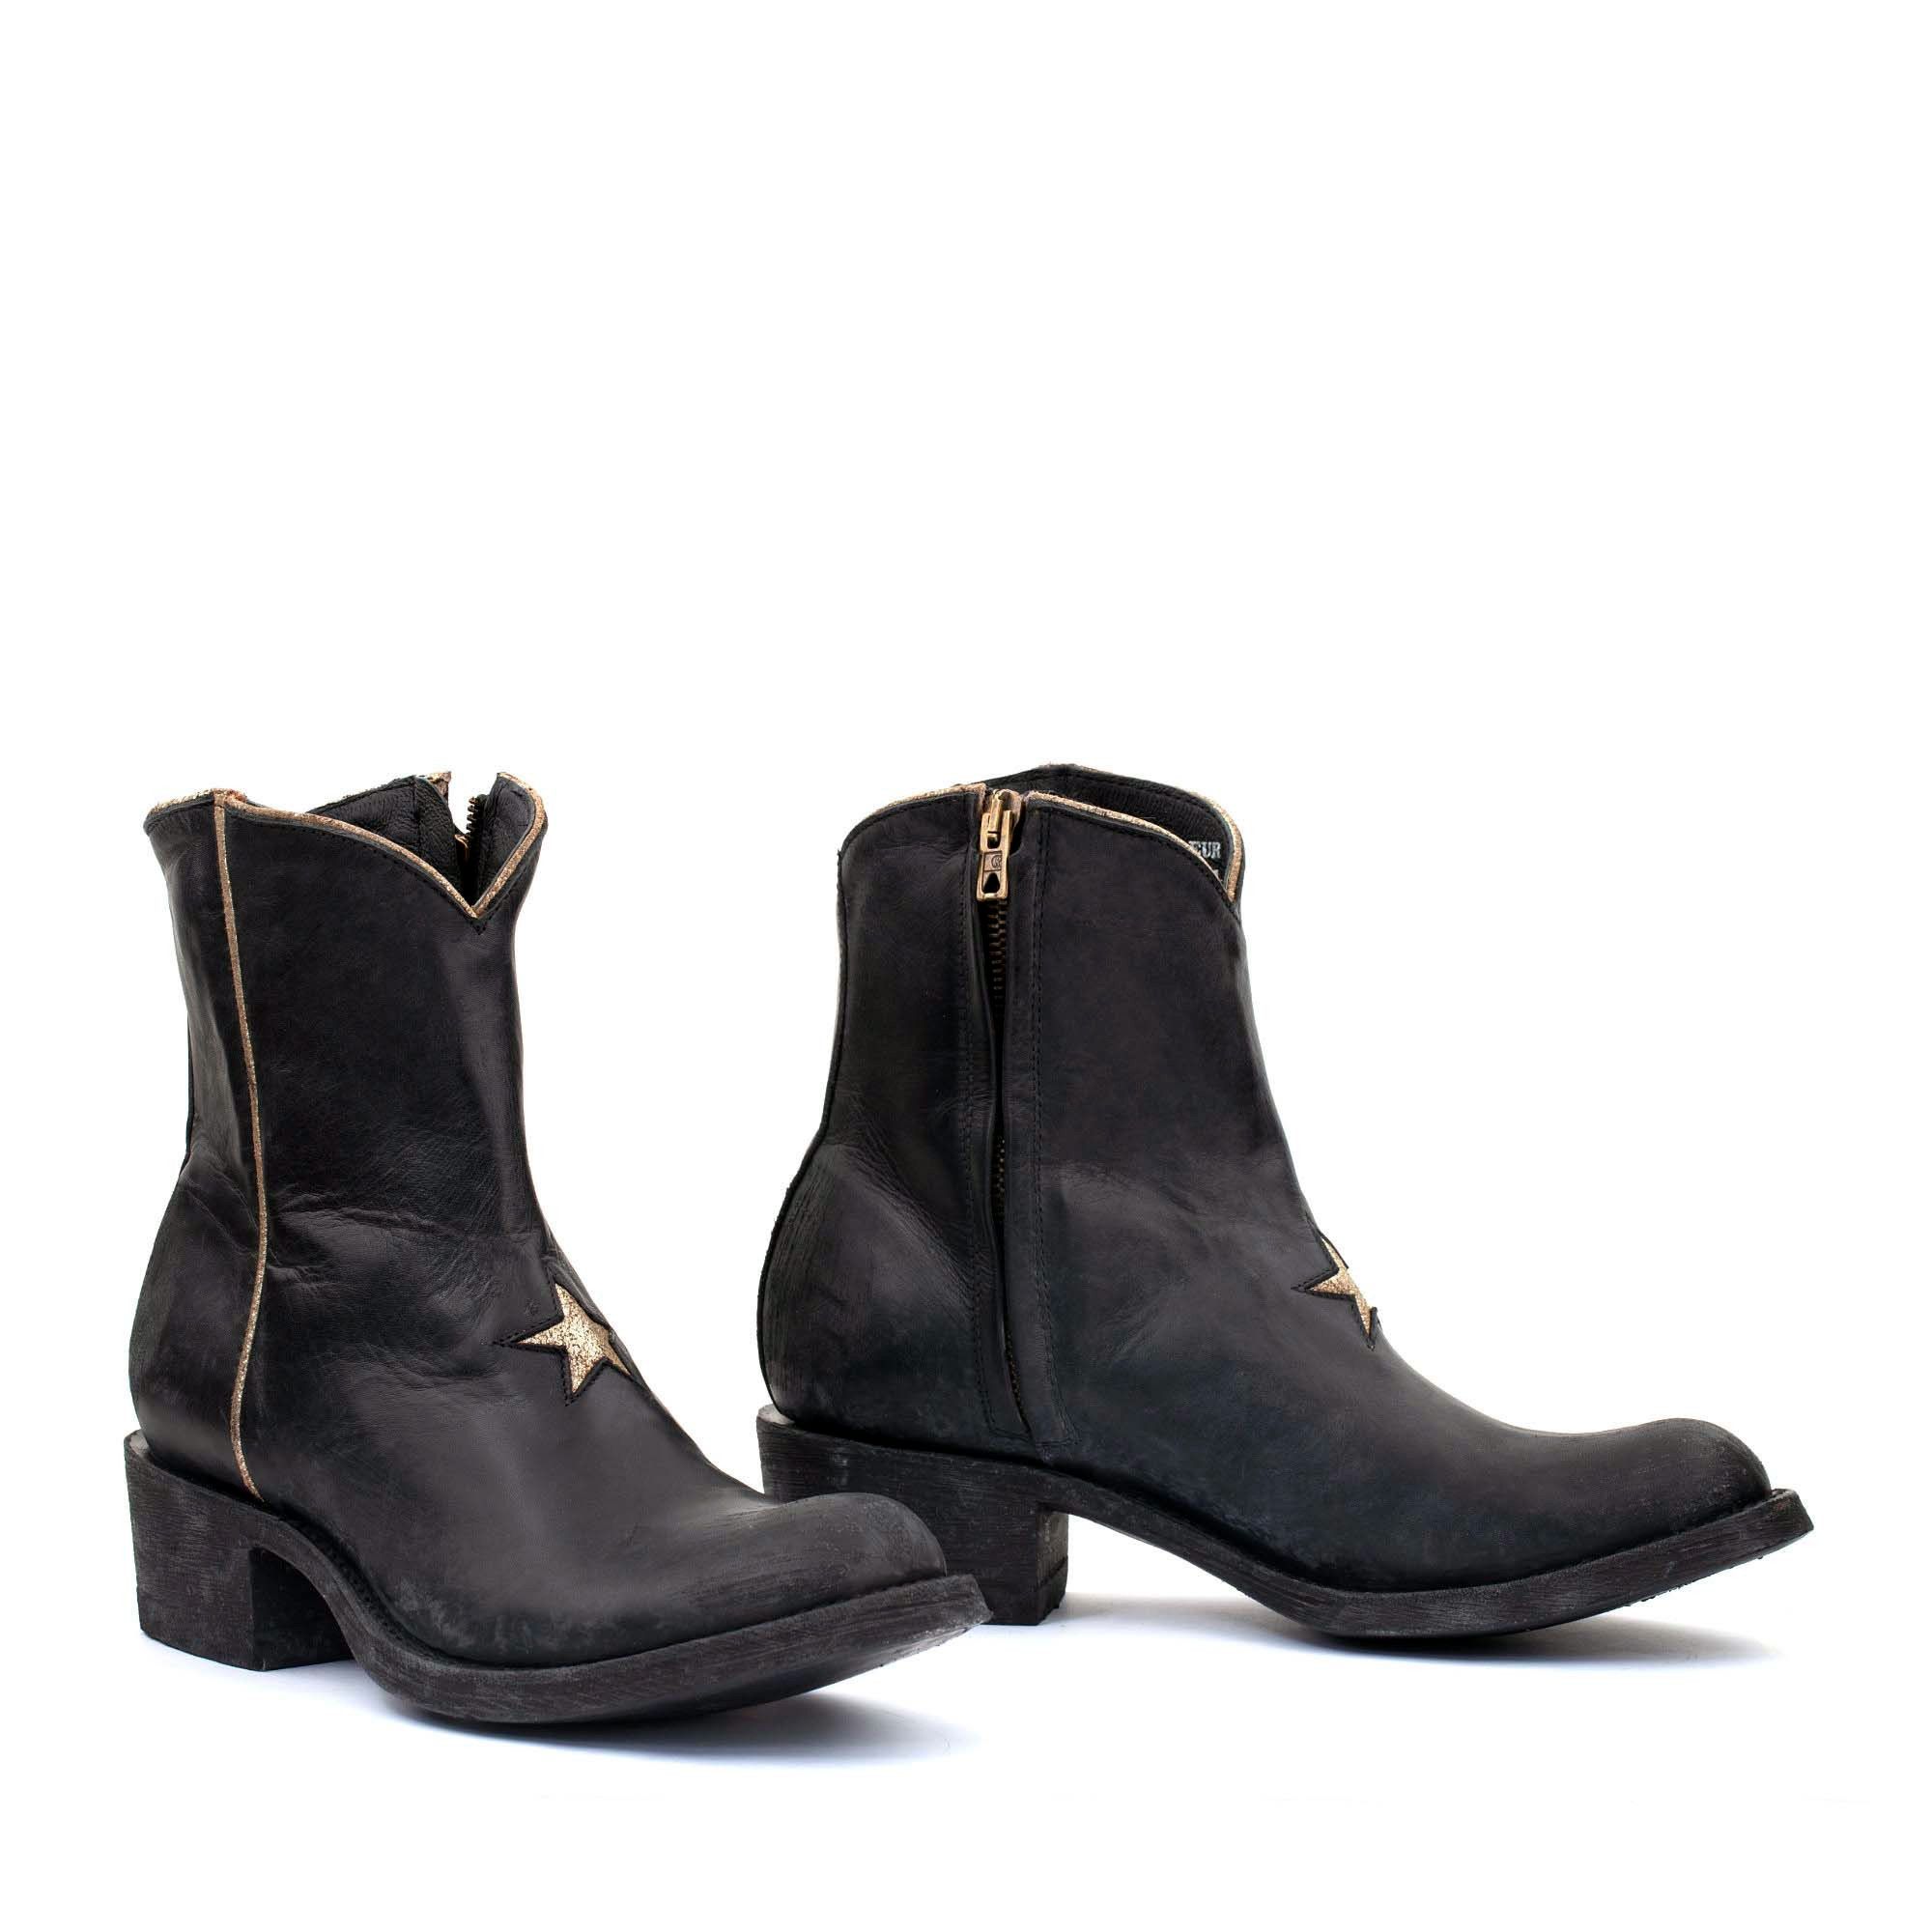 STAR BLACK / FUSIL ROUNDED TOE ANKLE BOOTS WITH STAR  AND SIDE ZIP CLOSURE  Total heel height 1.8 Inches  100% cow leather  Colo